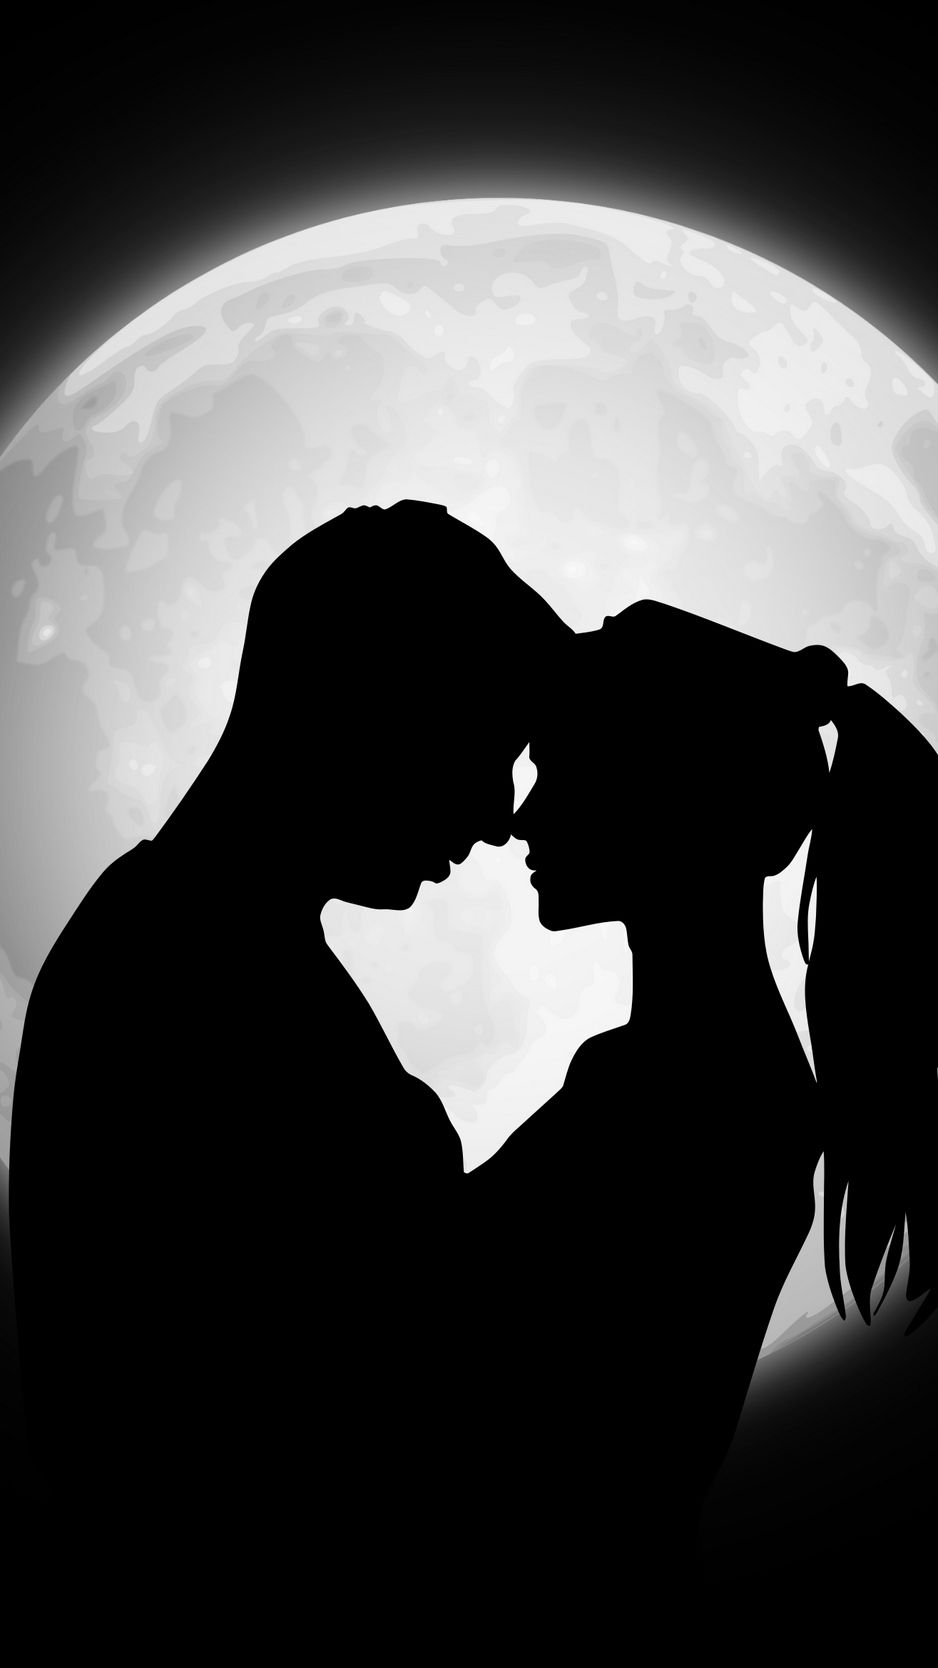 Wallpaper Couple, Silhouettes, Moon, Love Black And White